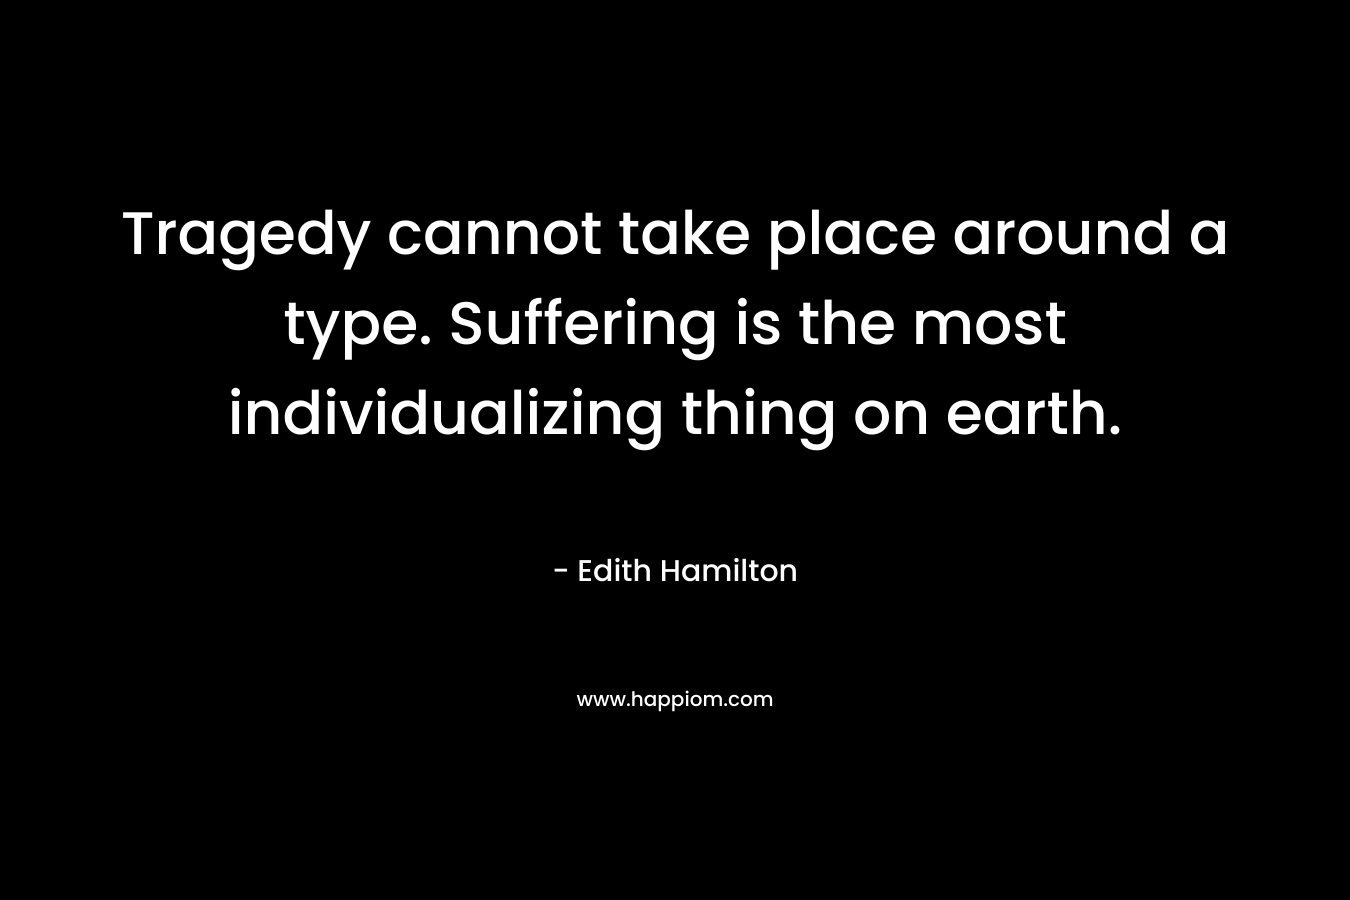 Tragedy cannot take place around a type. Suffering is the most individualizing thing on earth. – Edith Hamilton